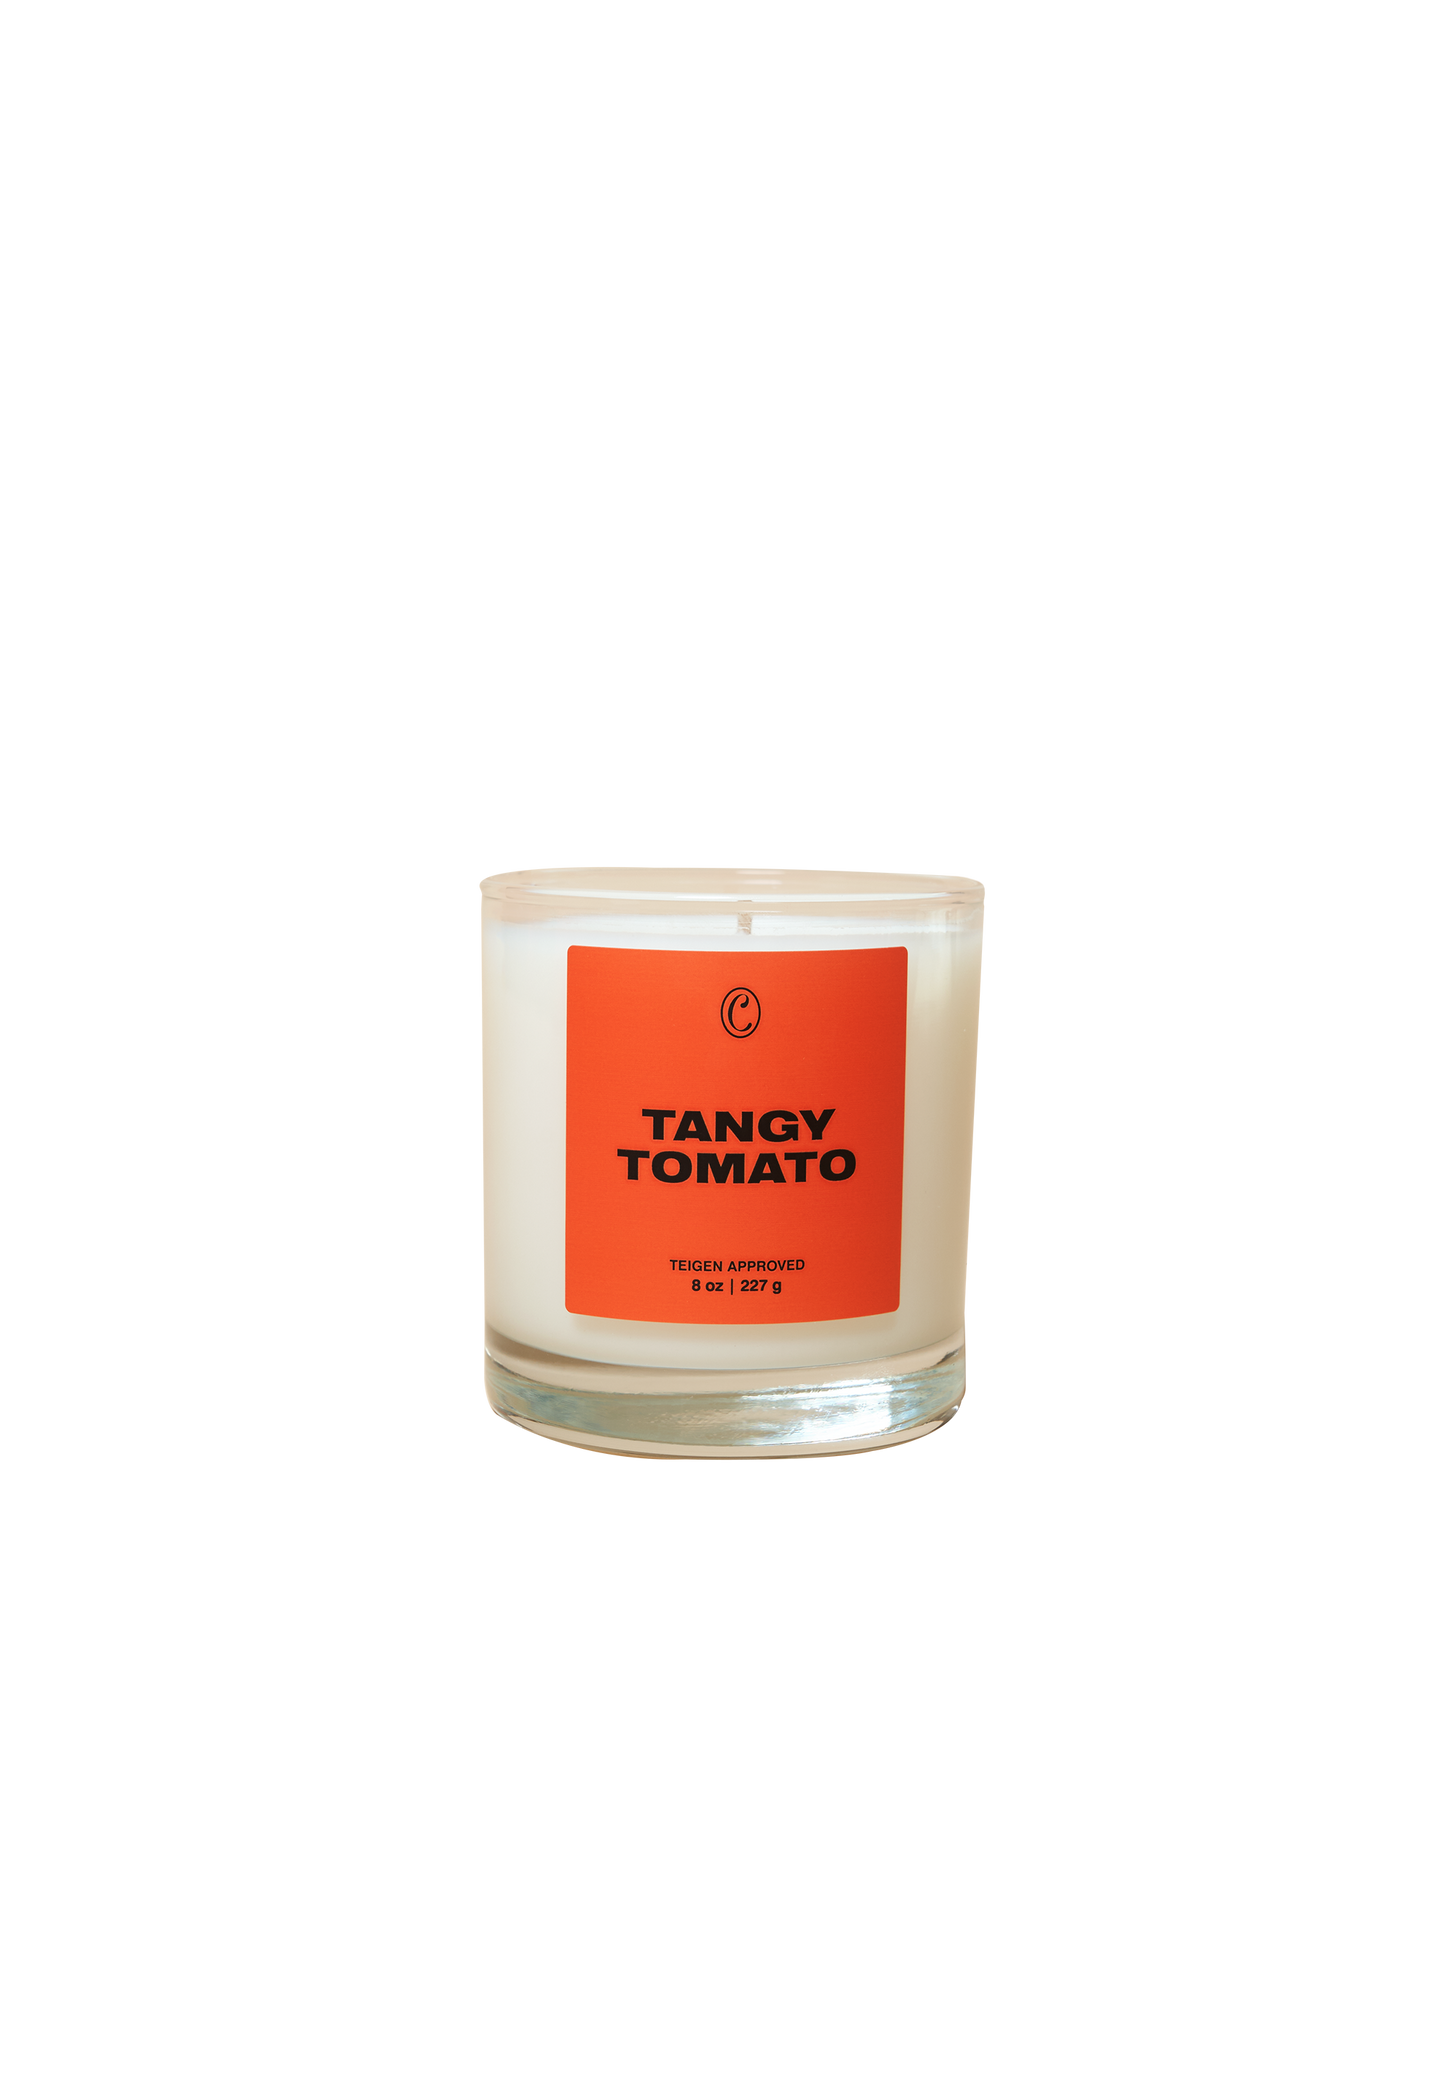 Cravings by Chrissy Teigen: Simmer Down Scented Candle in Tangy Tomato